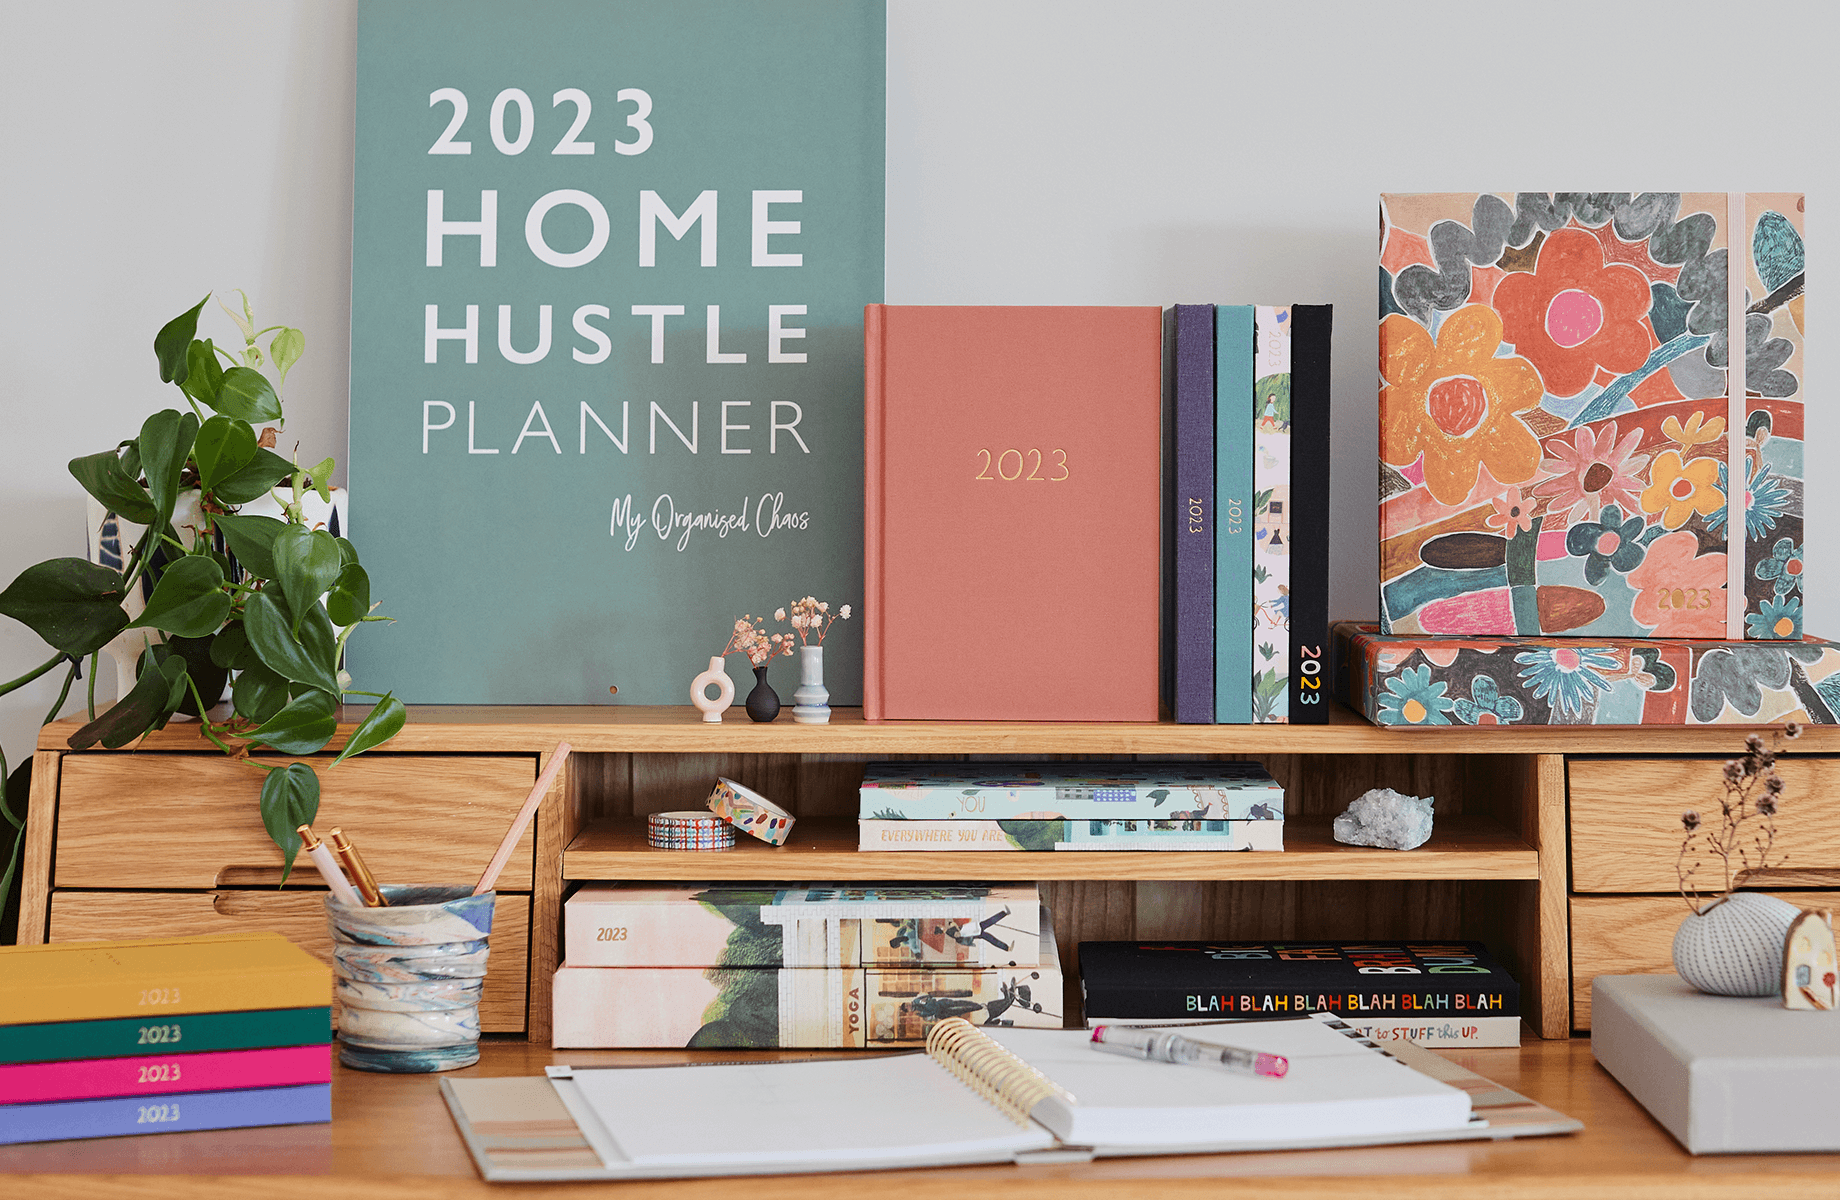 HOW PLANNERS CAN HELP DAILY